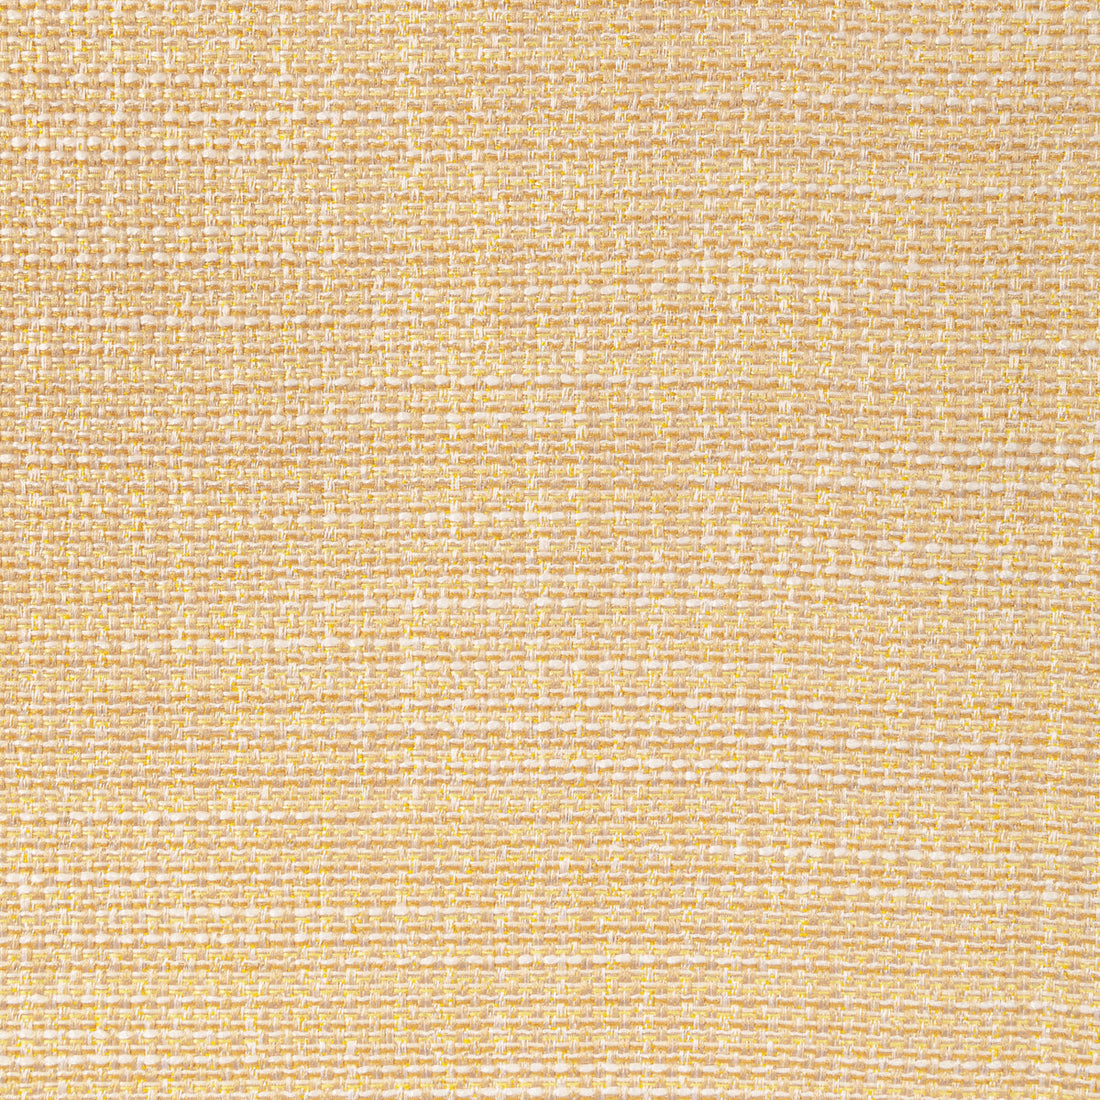 Luma Texture fabric in straw color - pattern 4947.416.0 - by Kravet Contract in the Fr Window Luma Texture collection